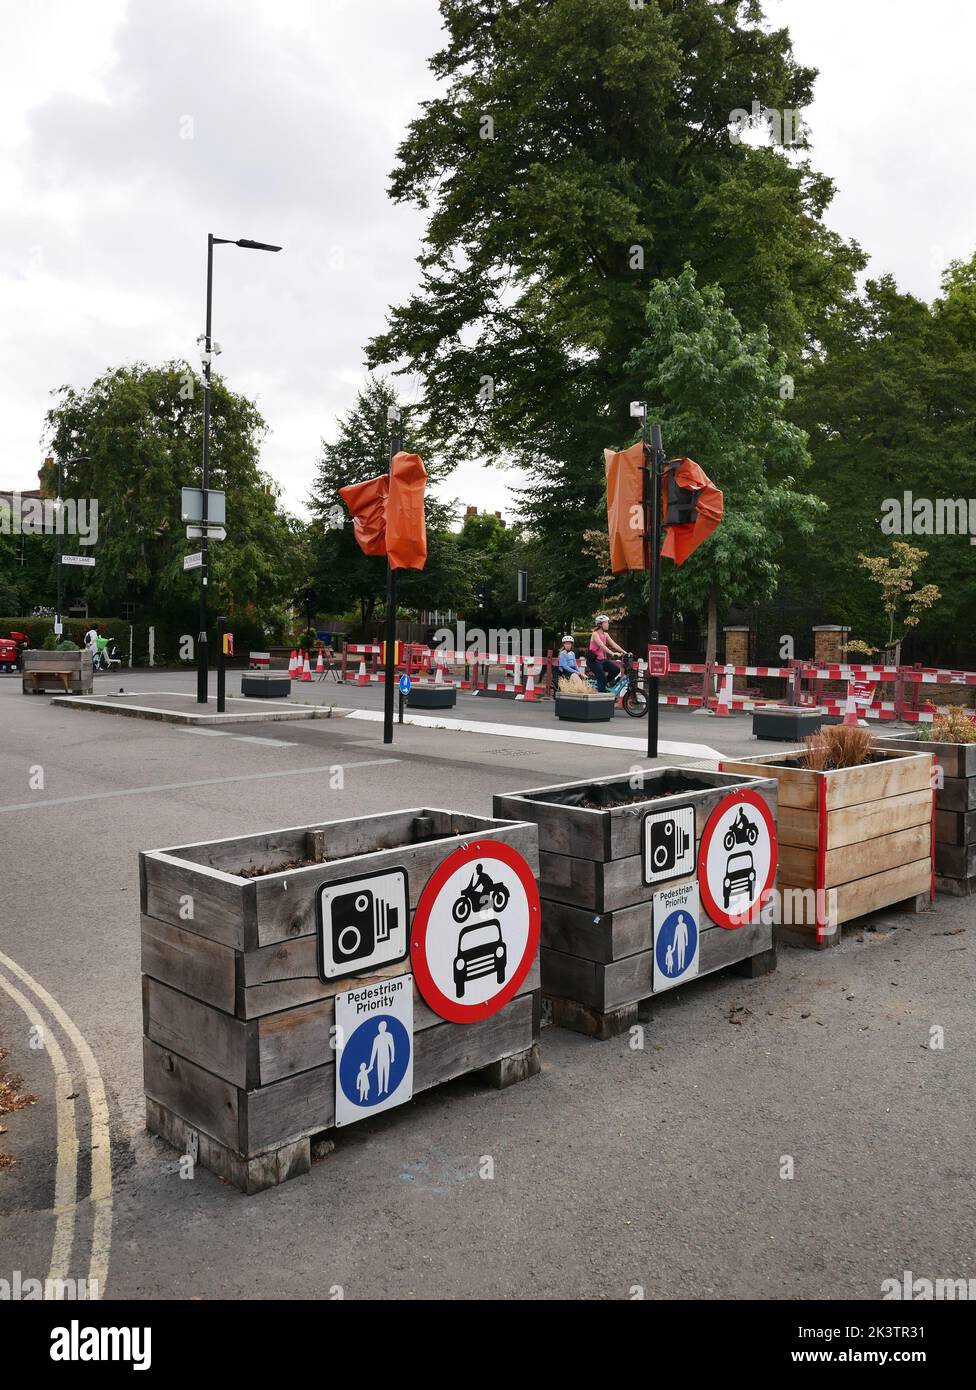 Dulwich streetspace project. Permeable road closures allowing pedestrians and cyclists to pass creating a low traffic neighbourhood. Stock Photo